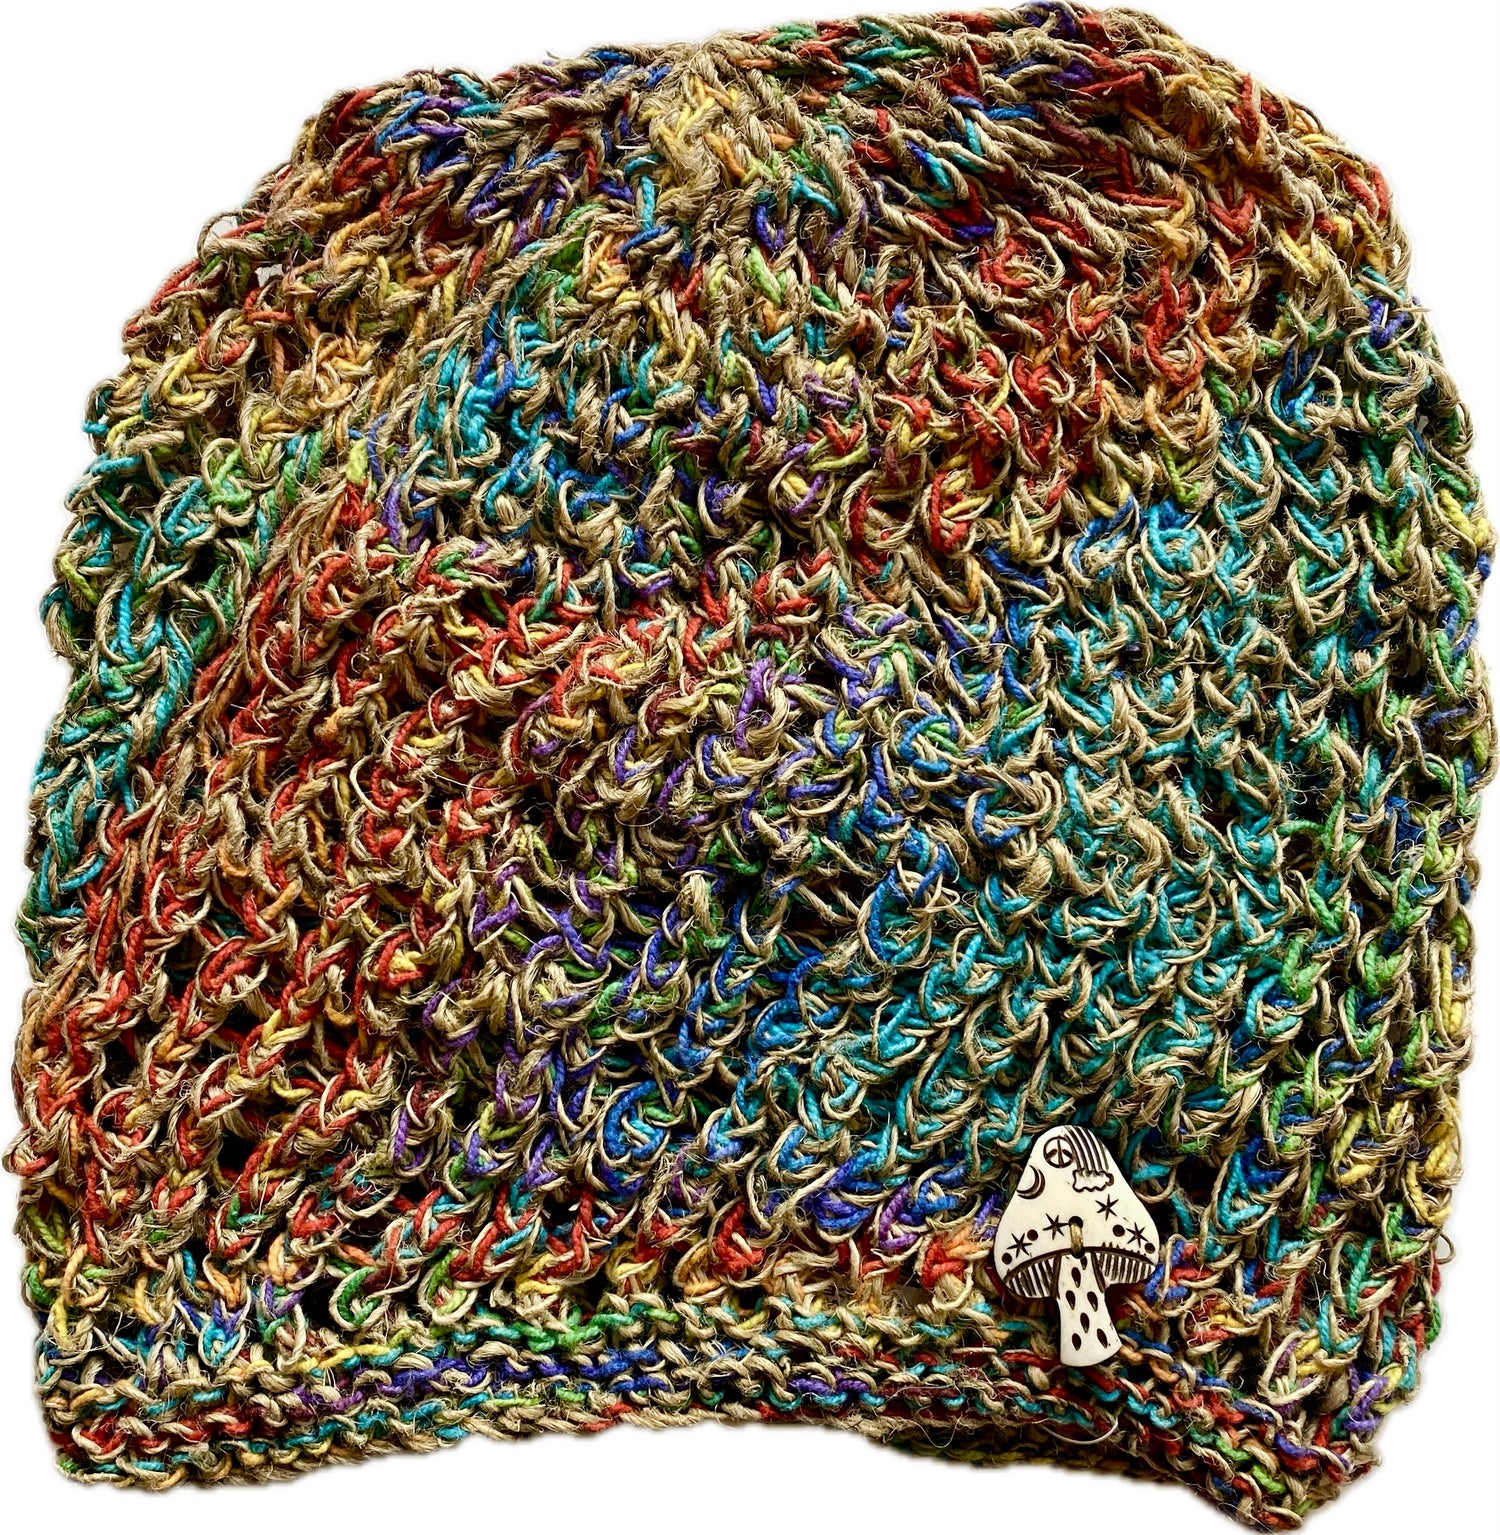 Handcrafted Hemp and Wool Hats